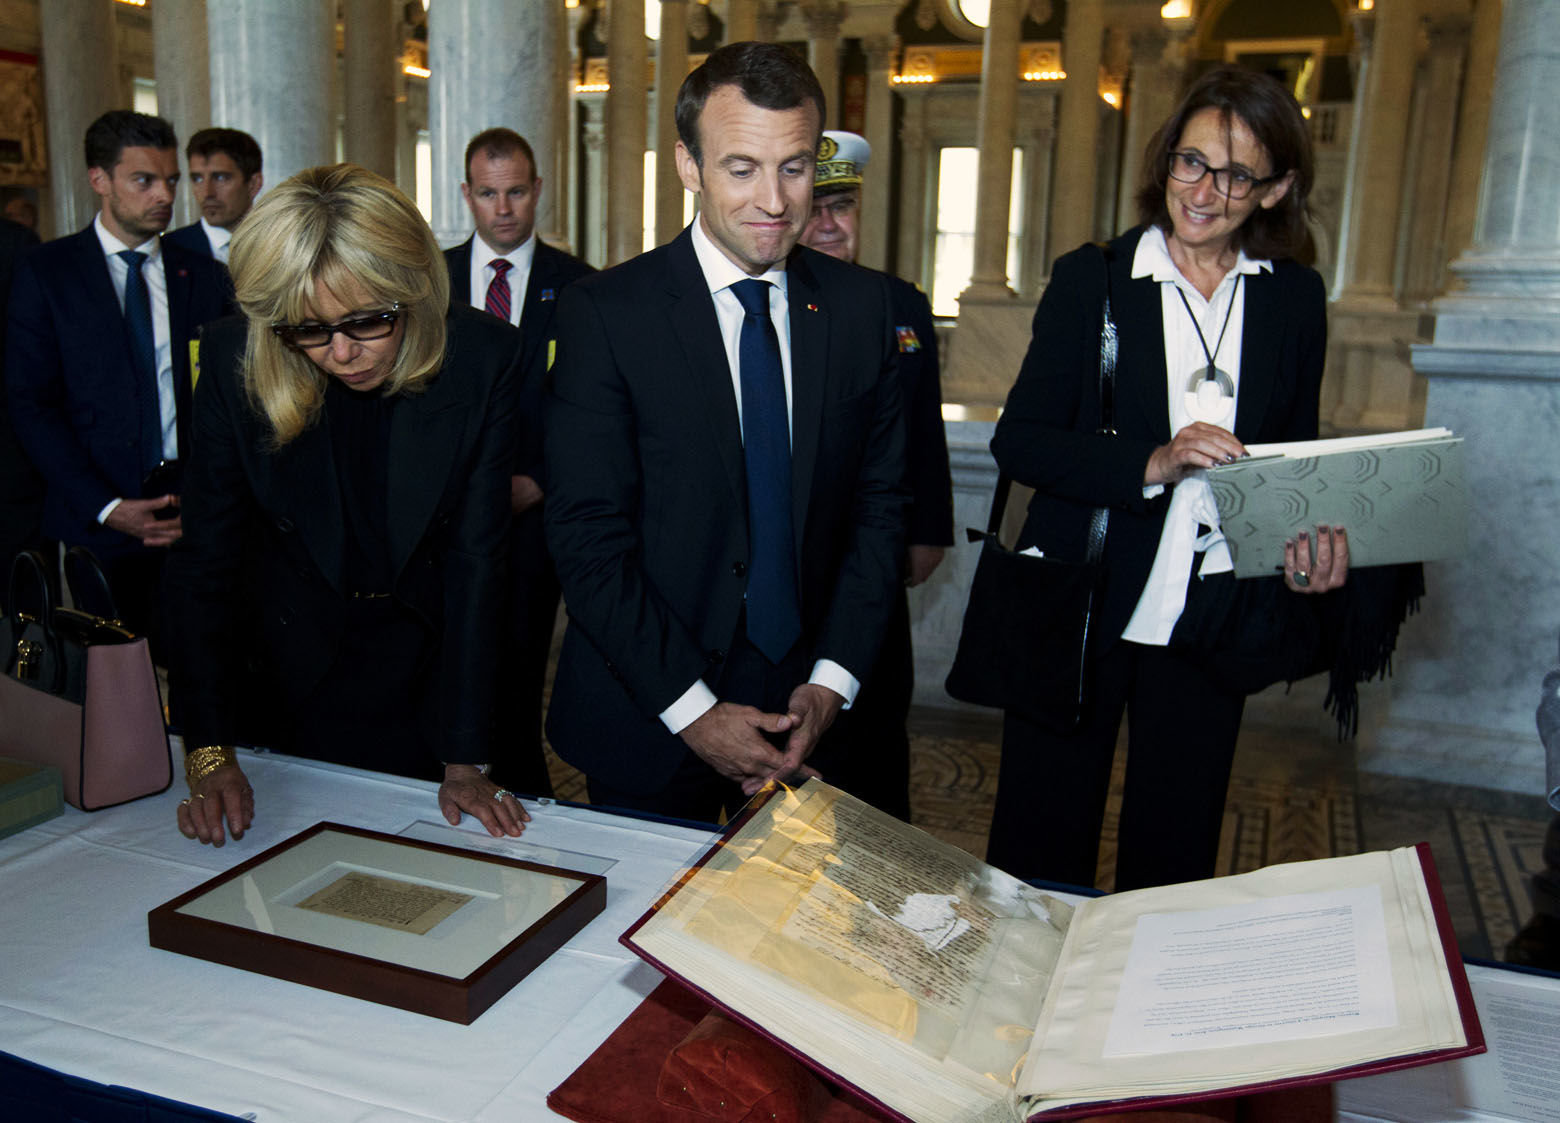 French President Emmanuel Macron and his wife Brigitte read a document during their visit to the Library of Congress on Wednesday, April 25, 2018, in Washington. ( AP Photo/Jose Luis Magana)